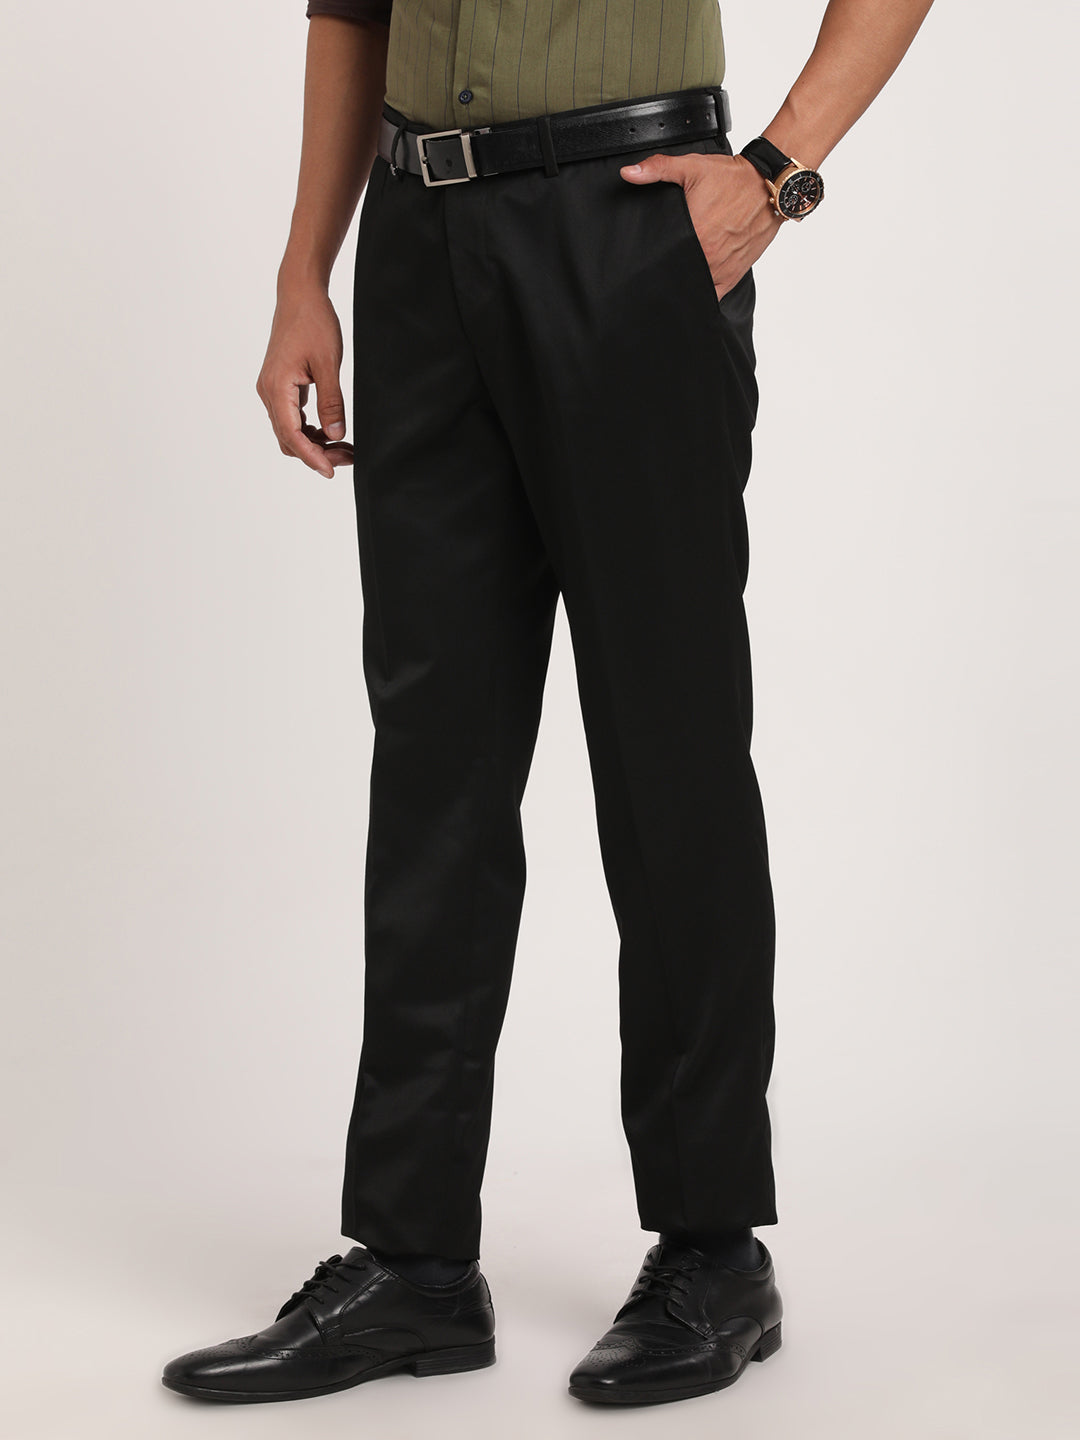 Buy STOP Solid Polyester Viscose Slim Fit Men's Formal Trousers | Shoppers  Stop